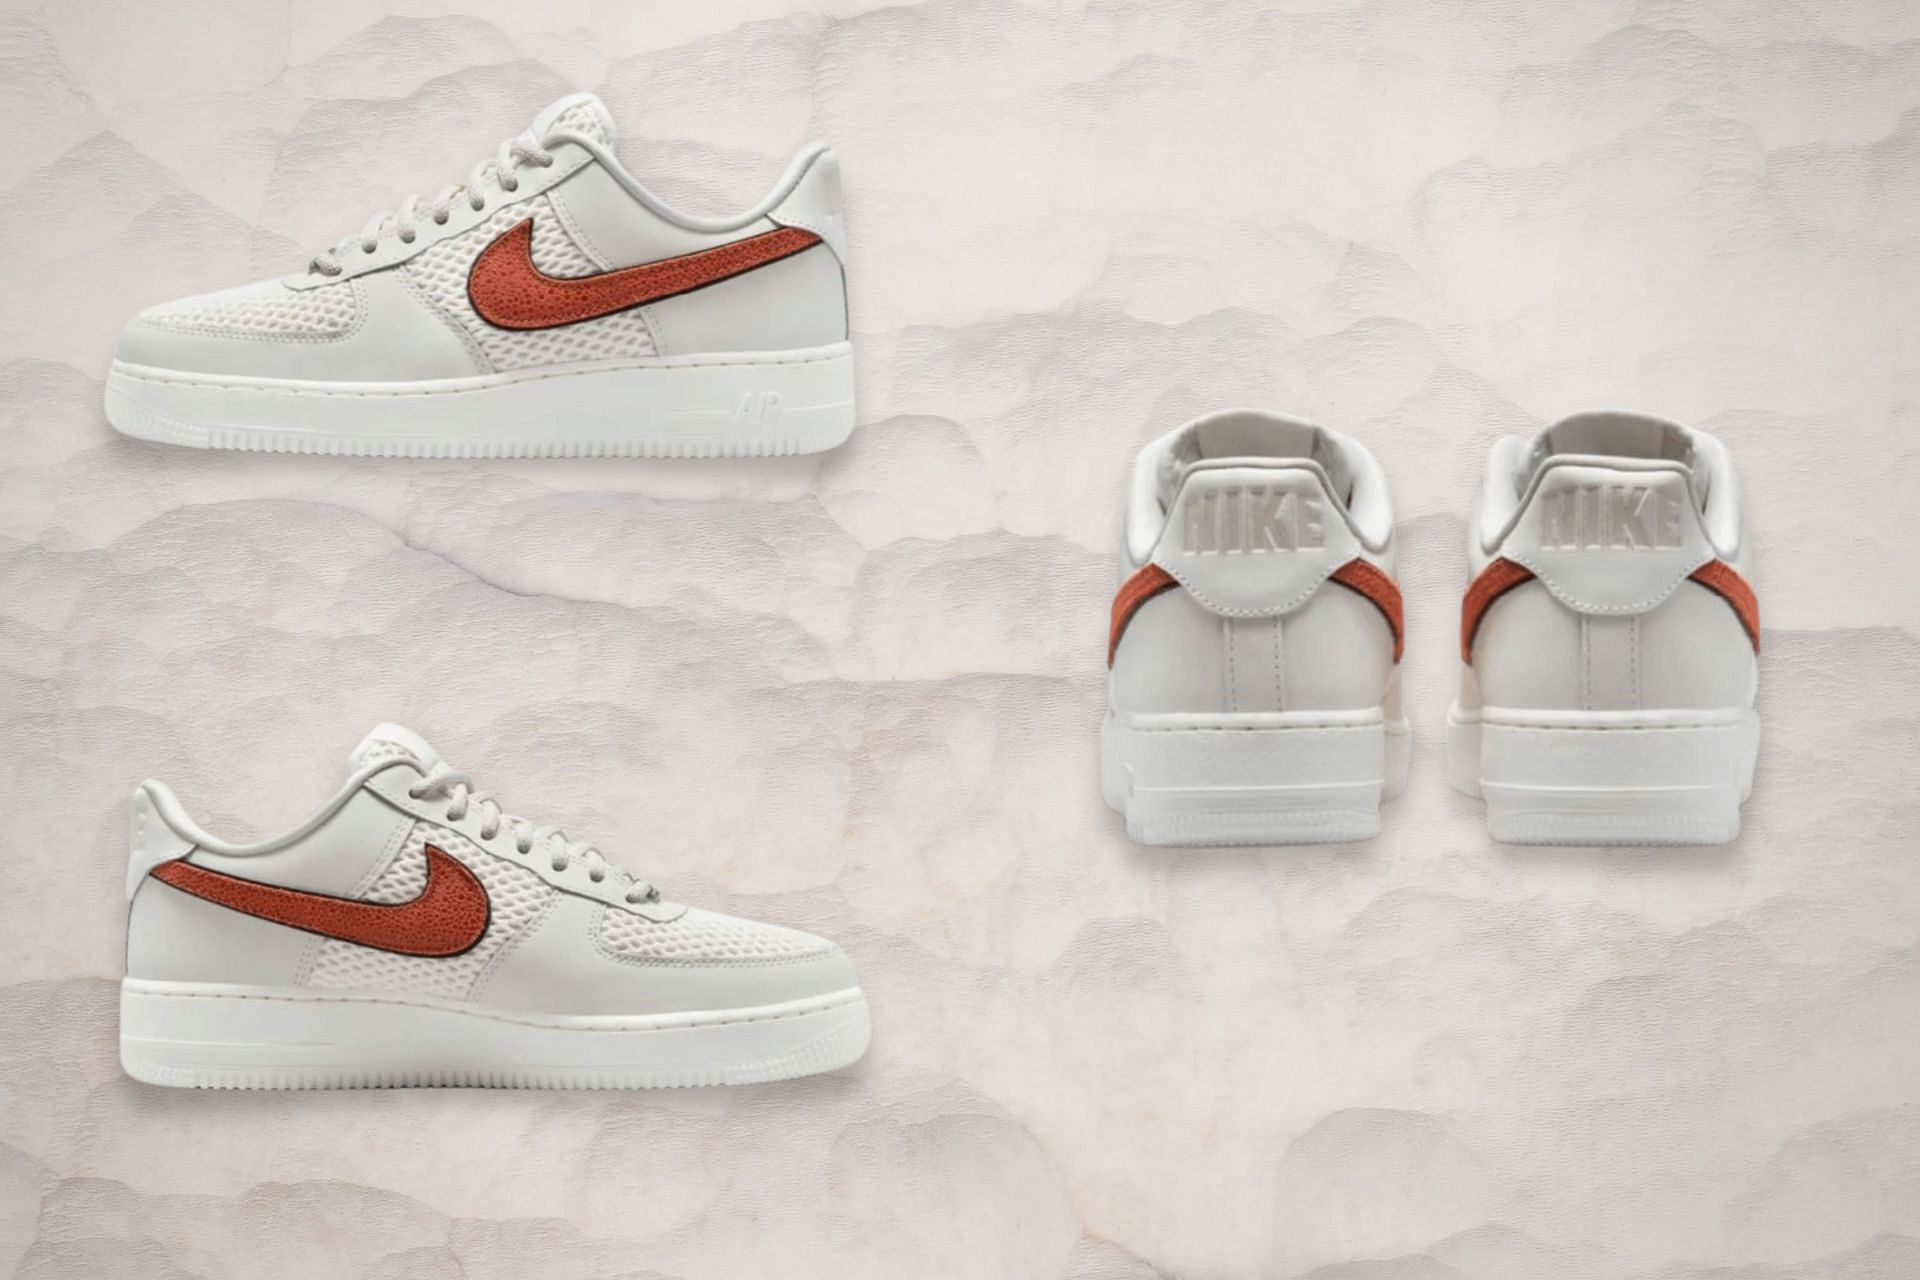 Nike Air Force 1 Low “Houston” drops November 12, 2022 DETAILED